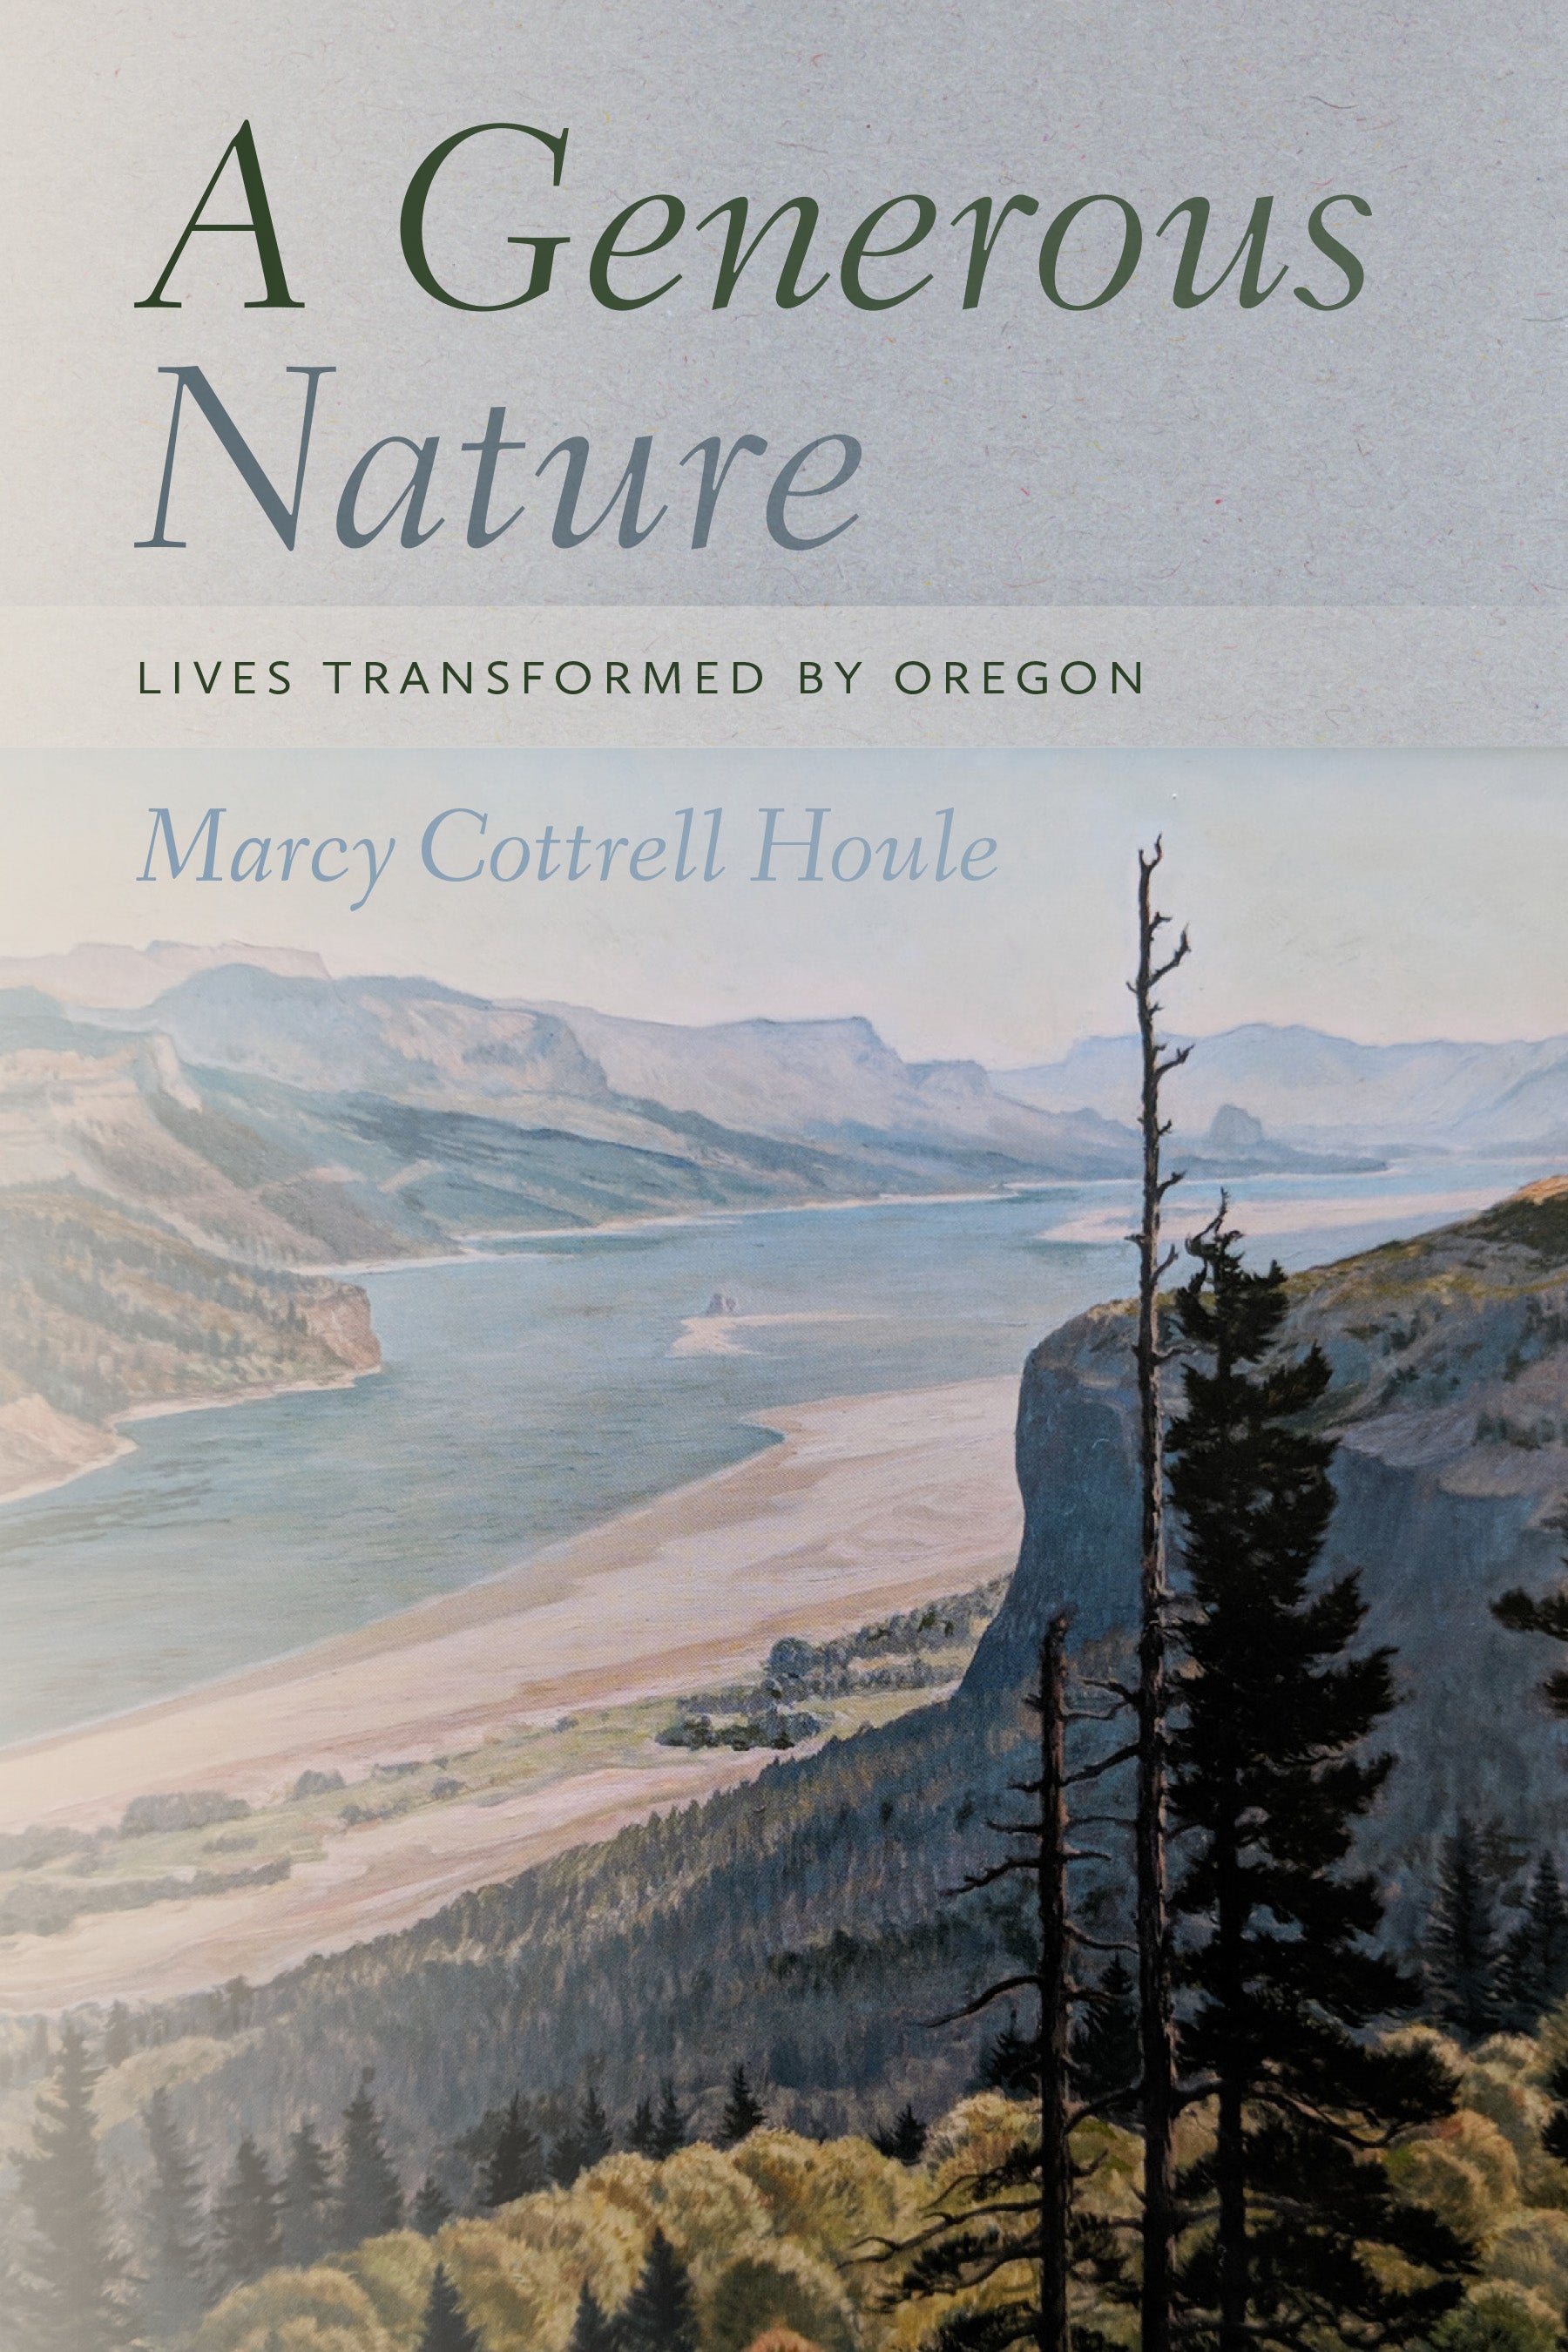 A Generous Nature - Lives Transformed by Oregon